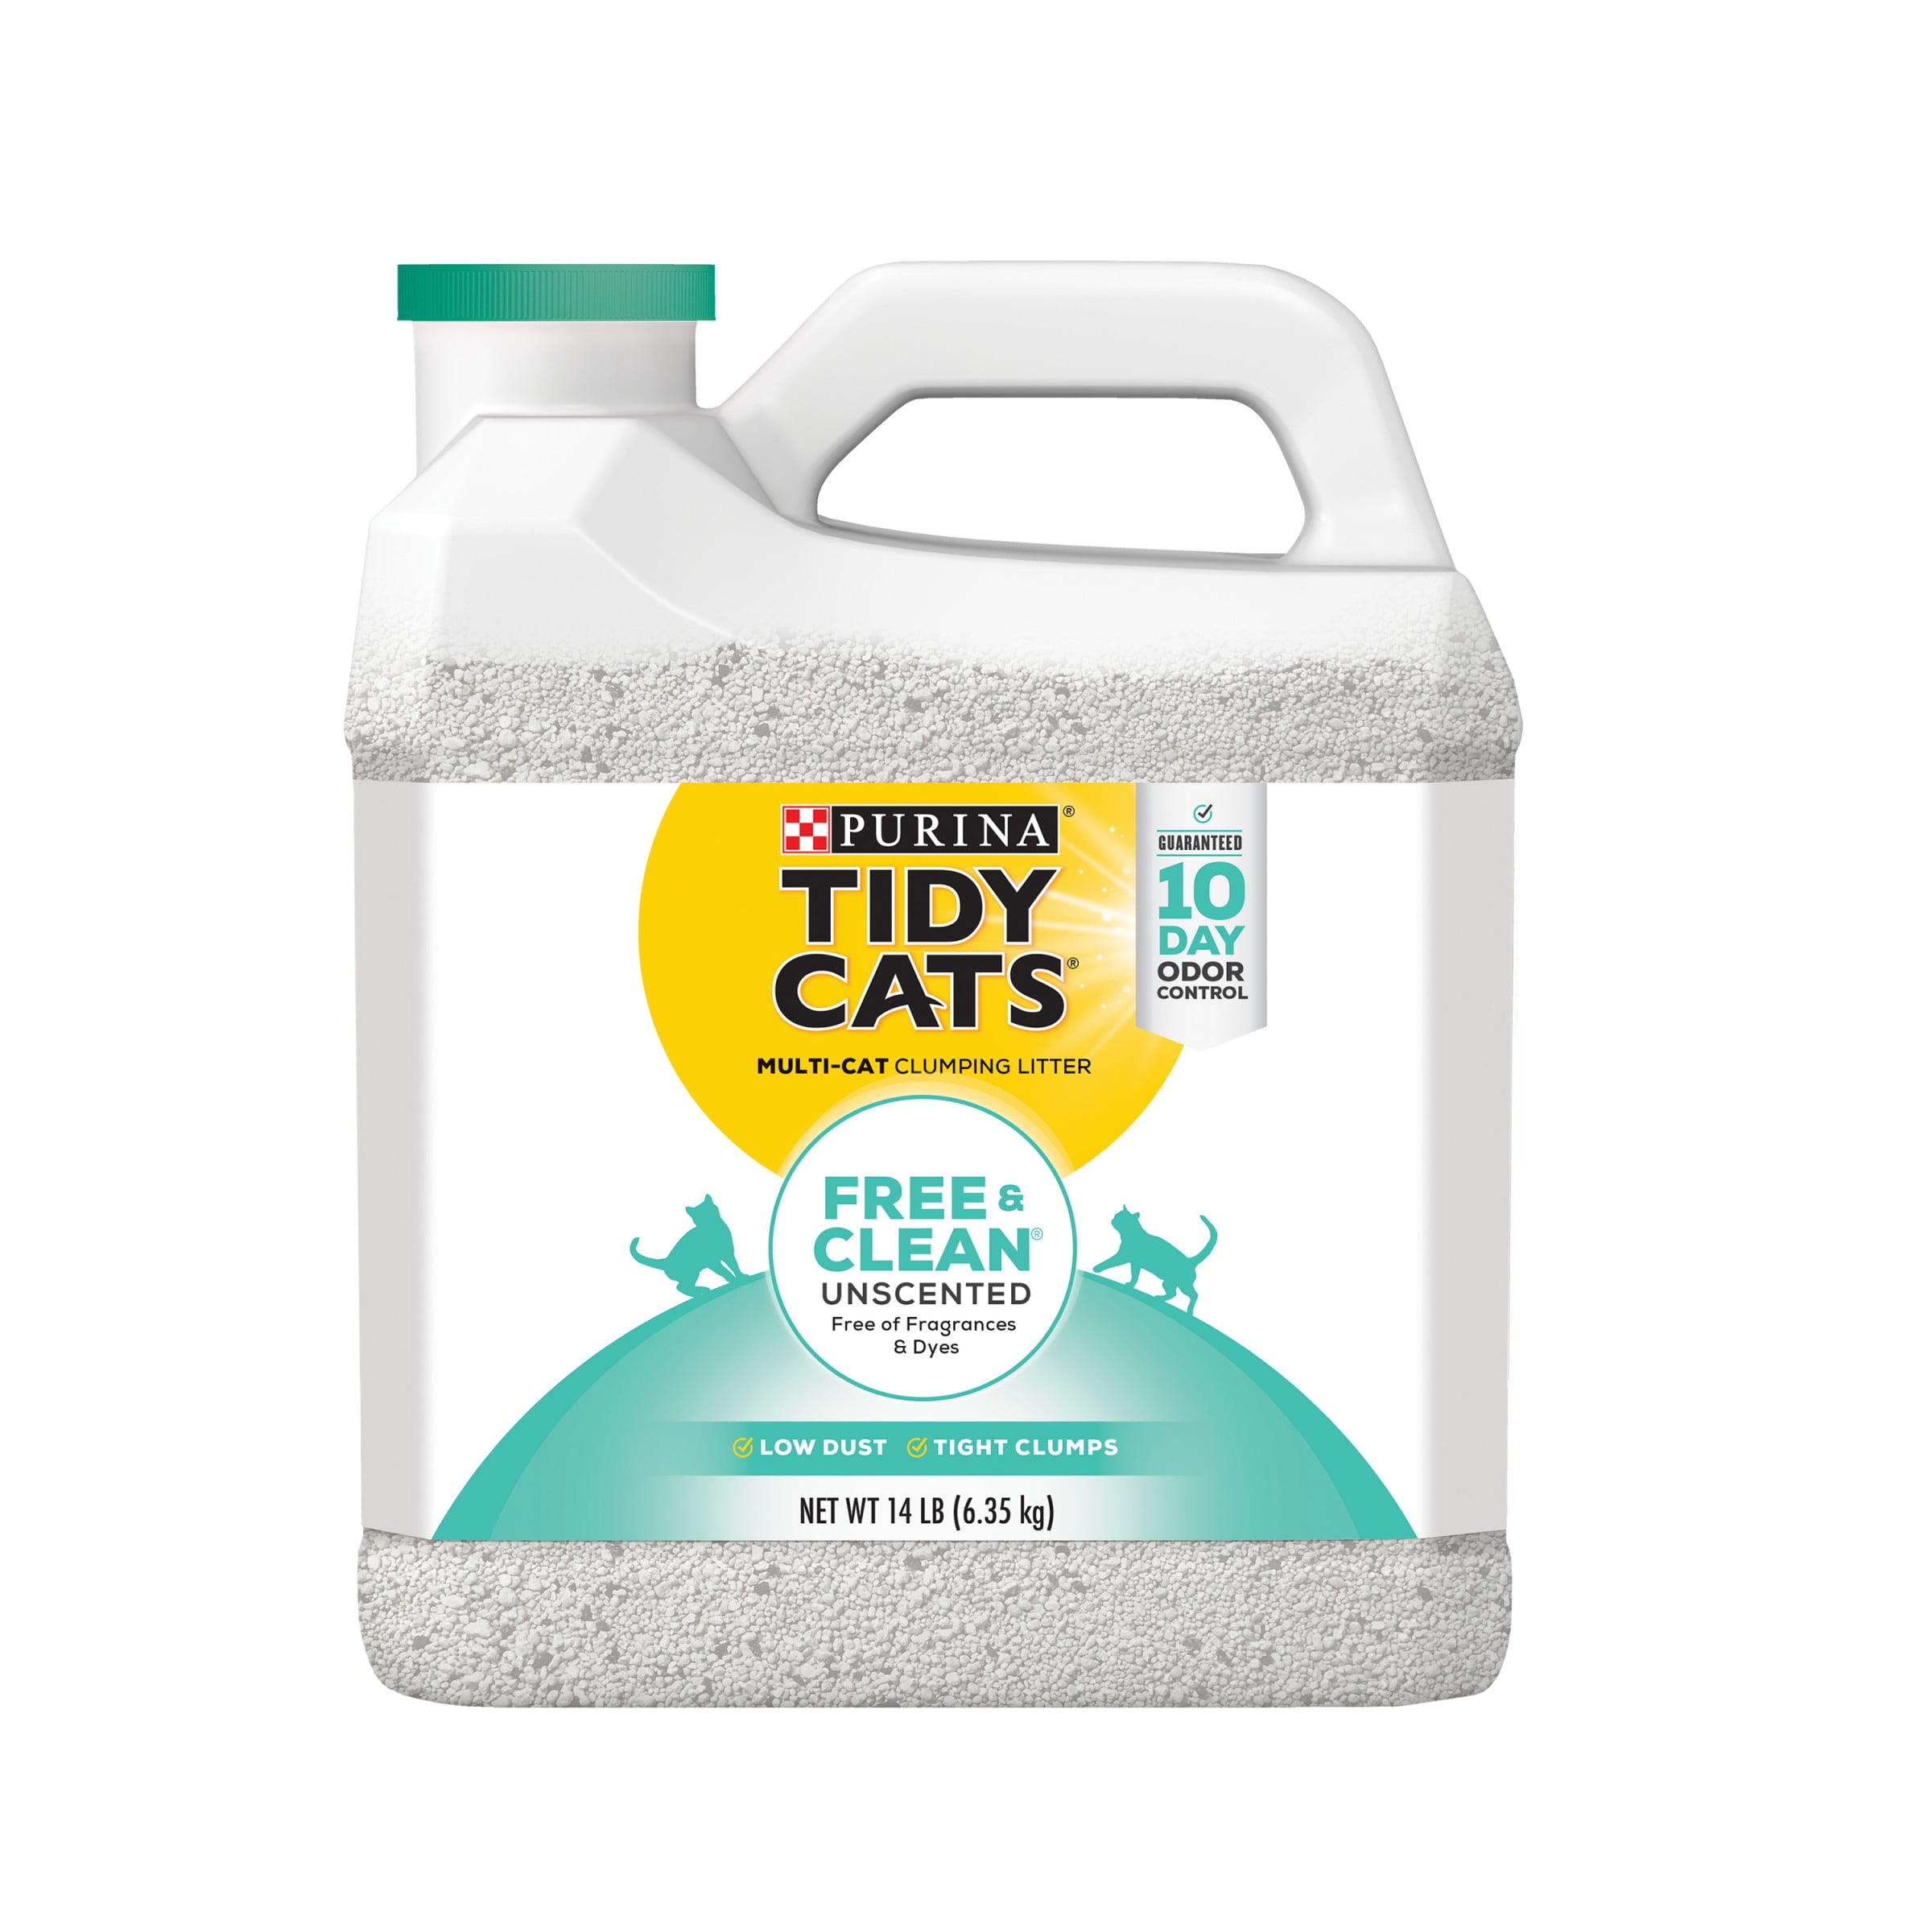 Keep Your Home Clean & Tidy With This Double-layer, Waterproof